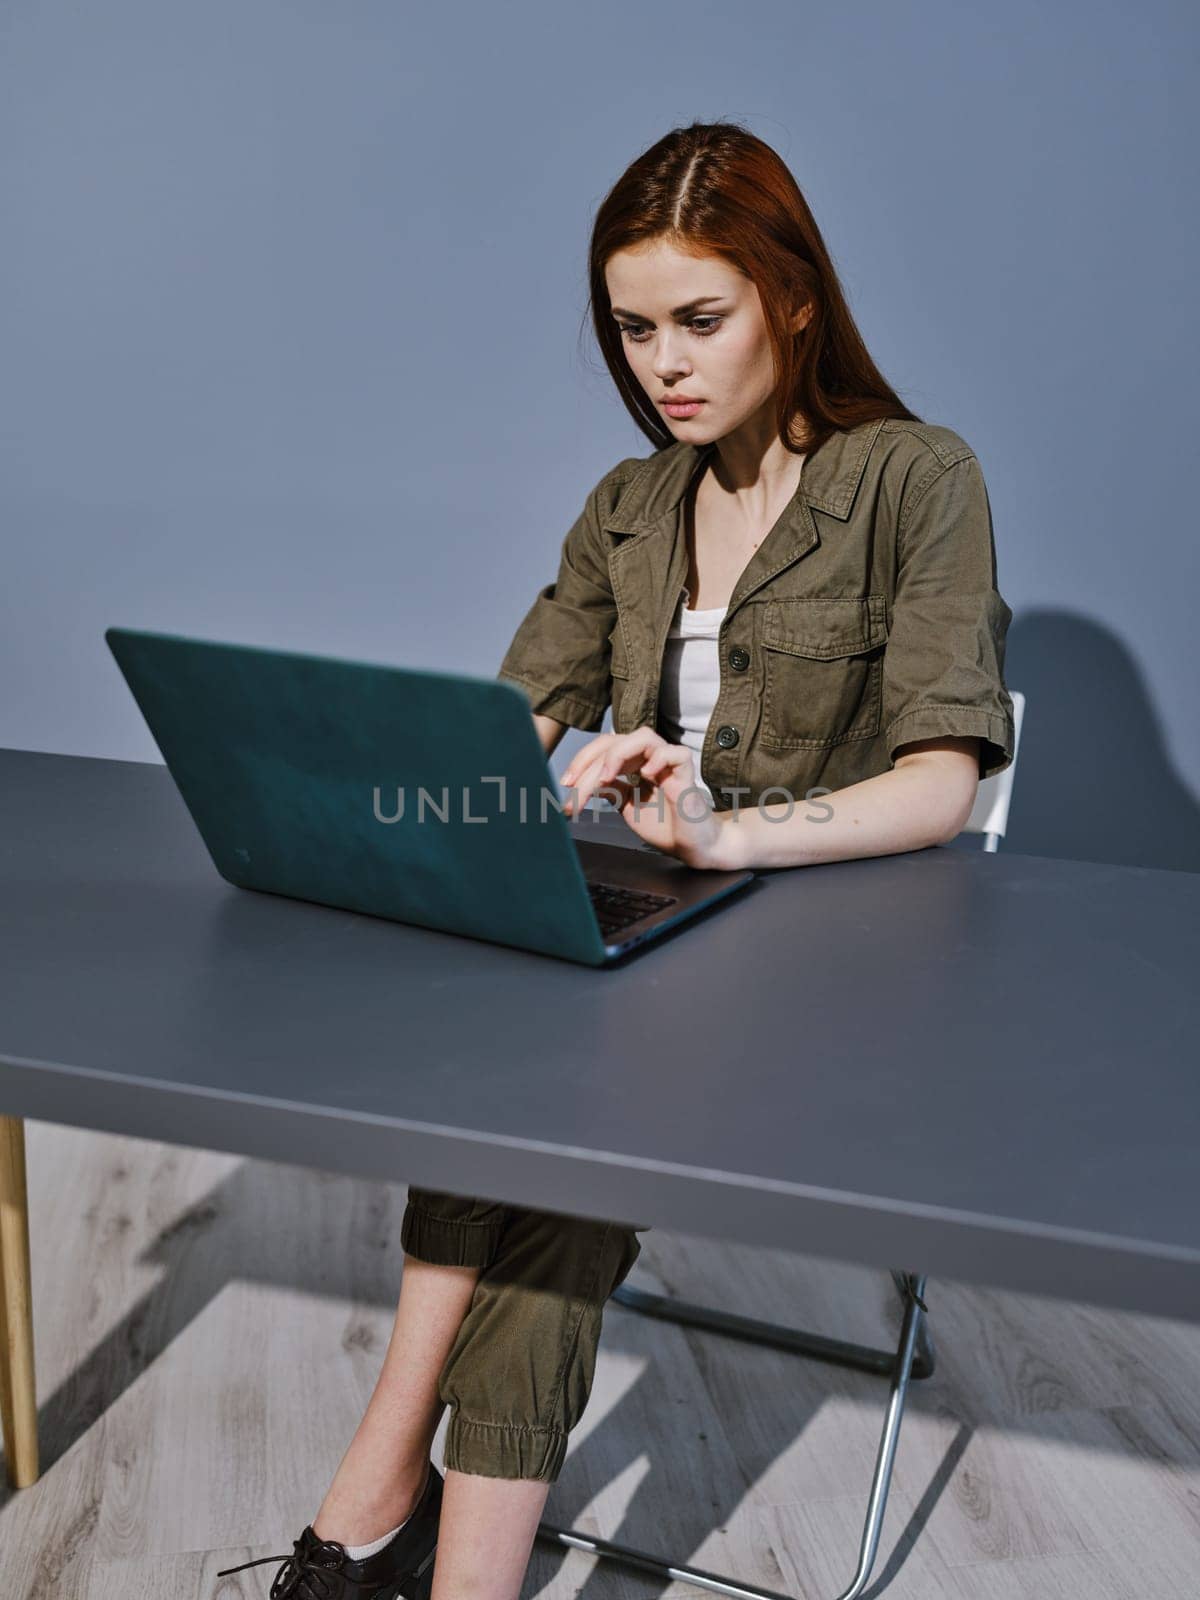 woman working on a laptop while sitting in a room at a table. High quality photo